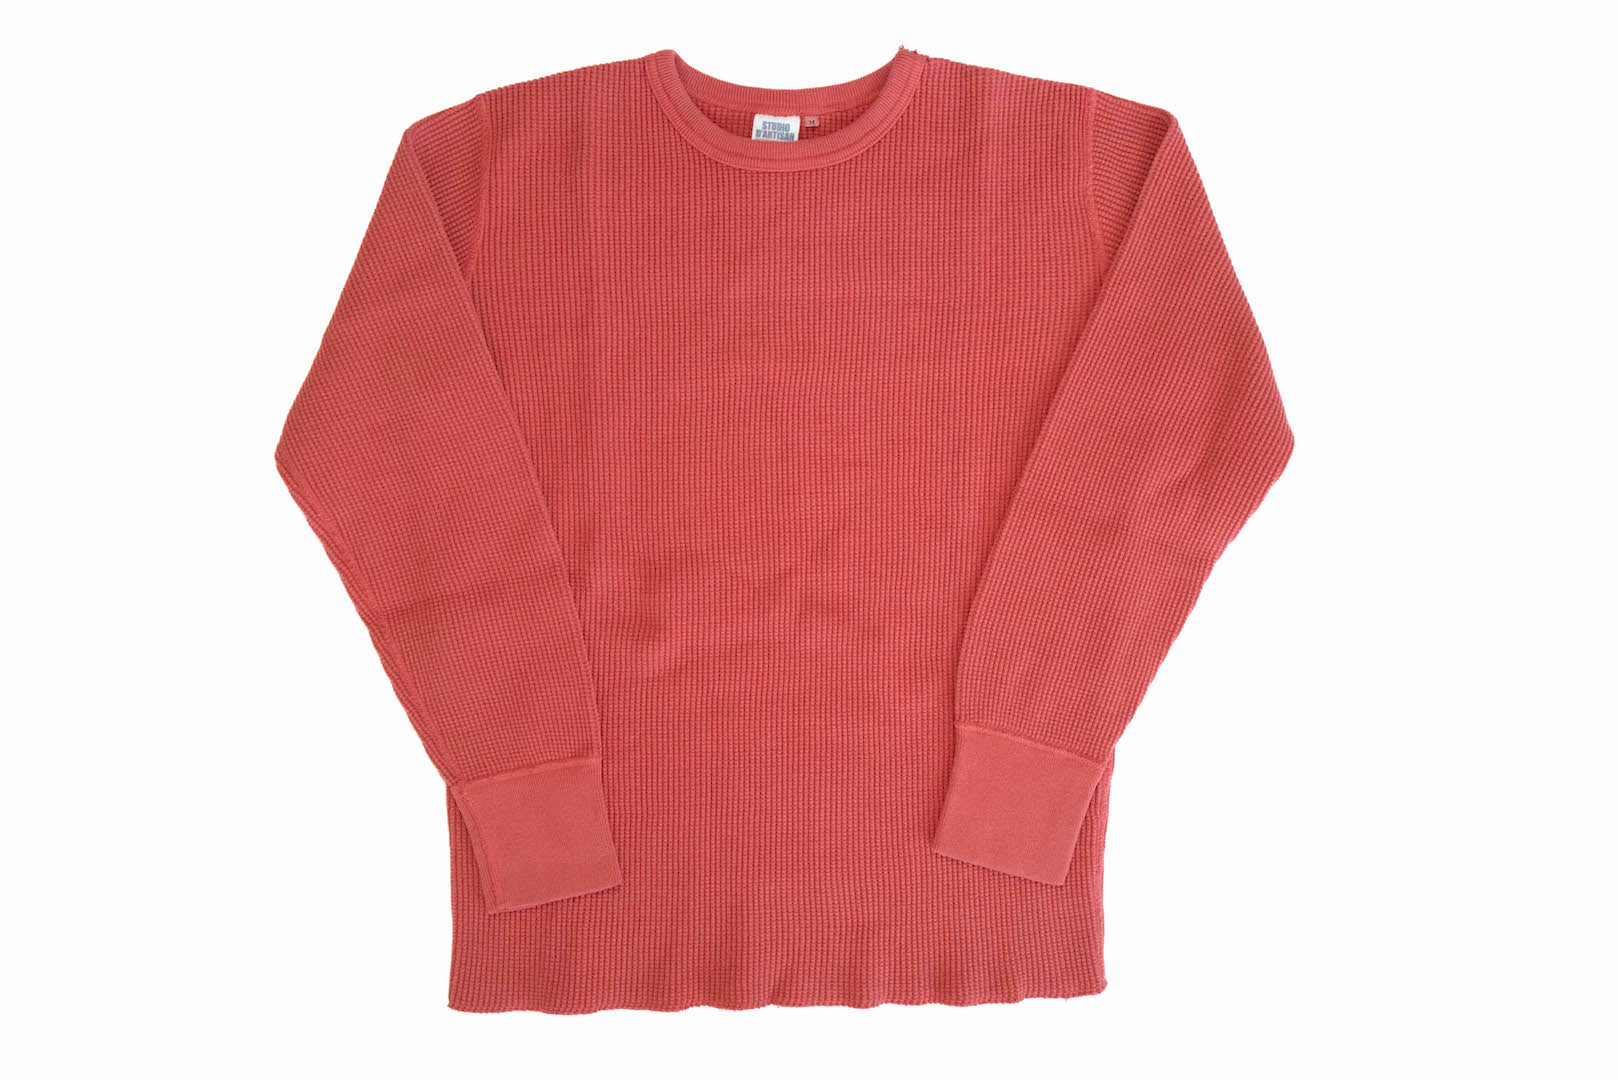 Studio D'Artisan Ultra Heavyweight Thermal (Faded Red)